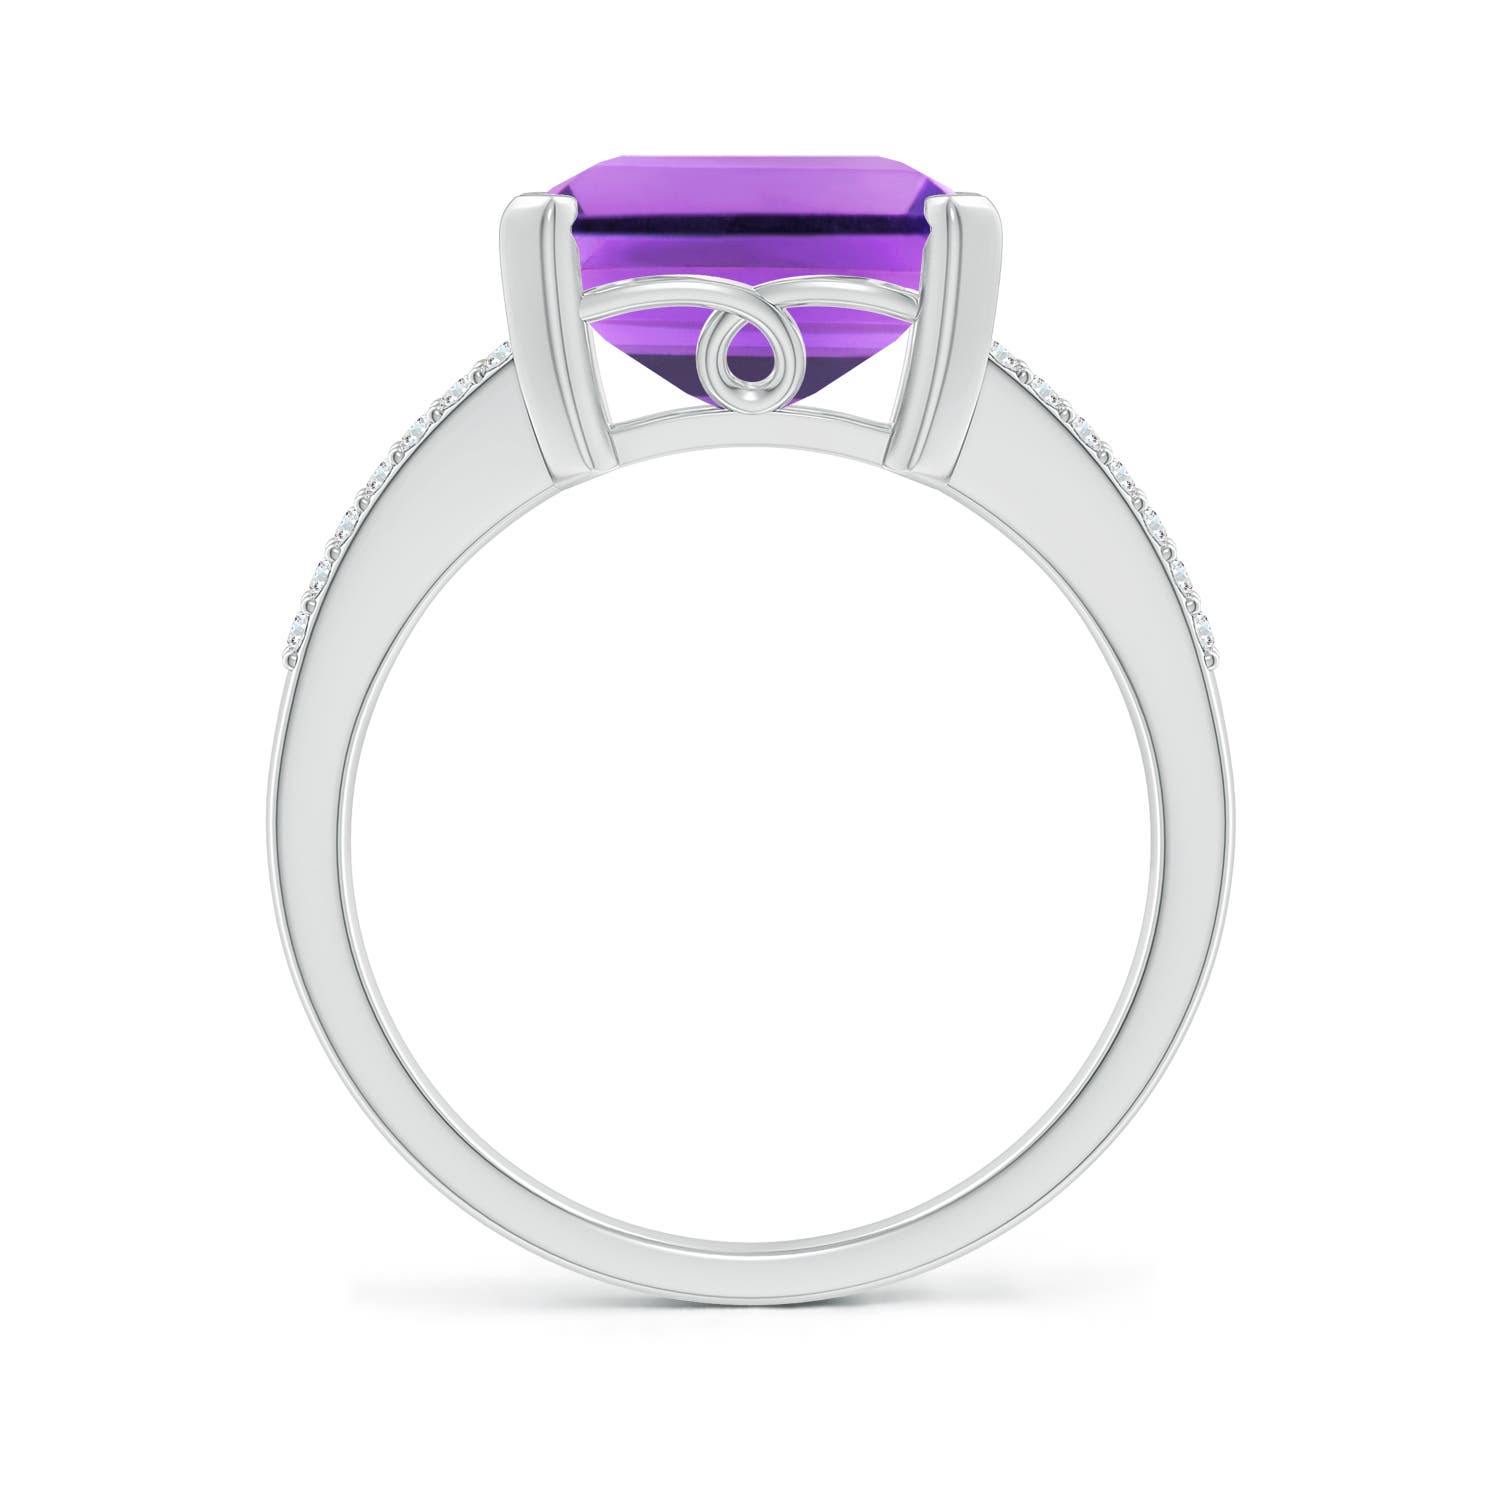 AA - Amethyst / 5.47 CT / 14 KT White Gold